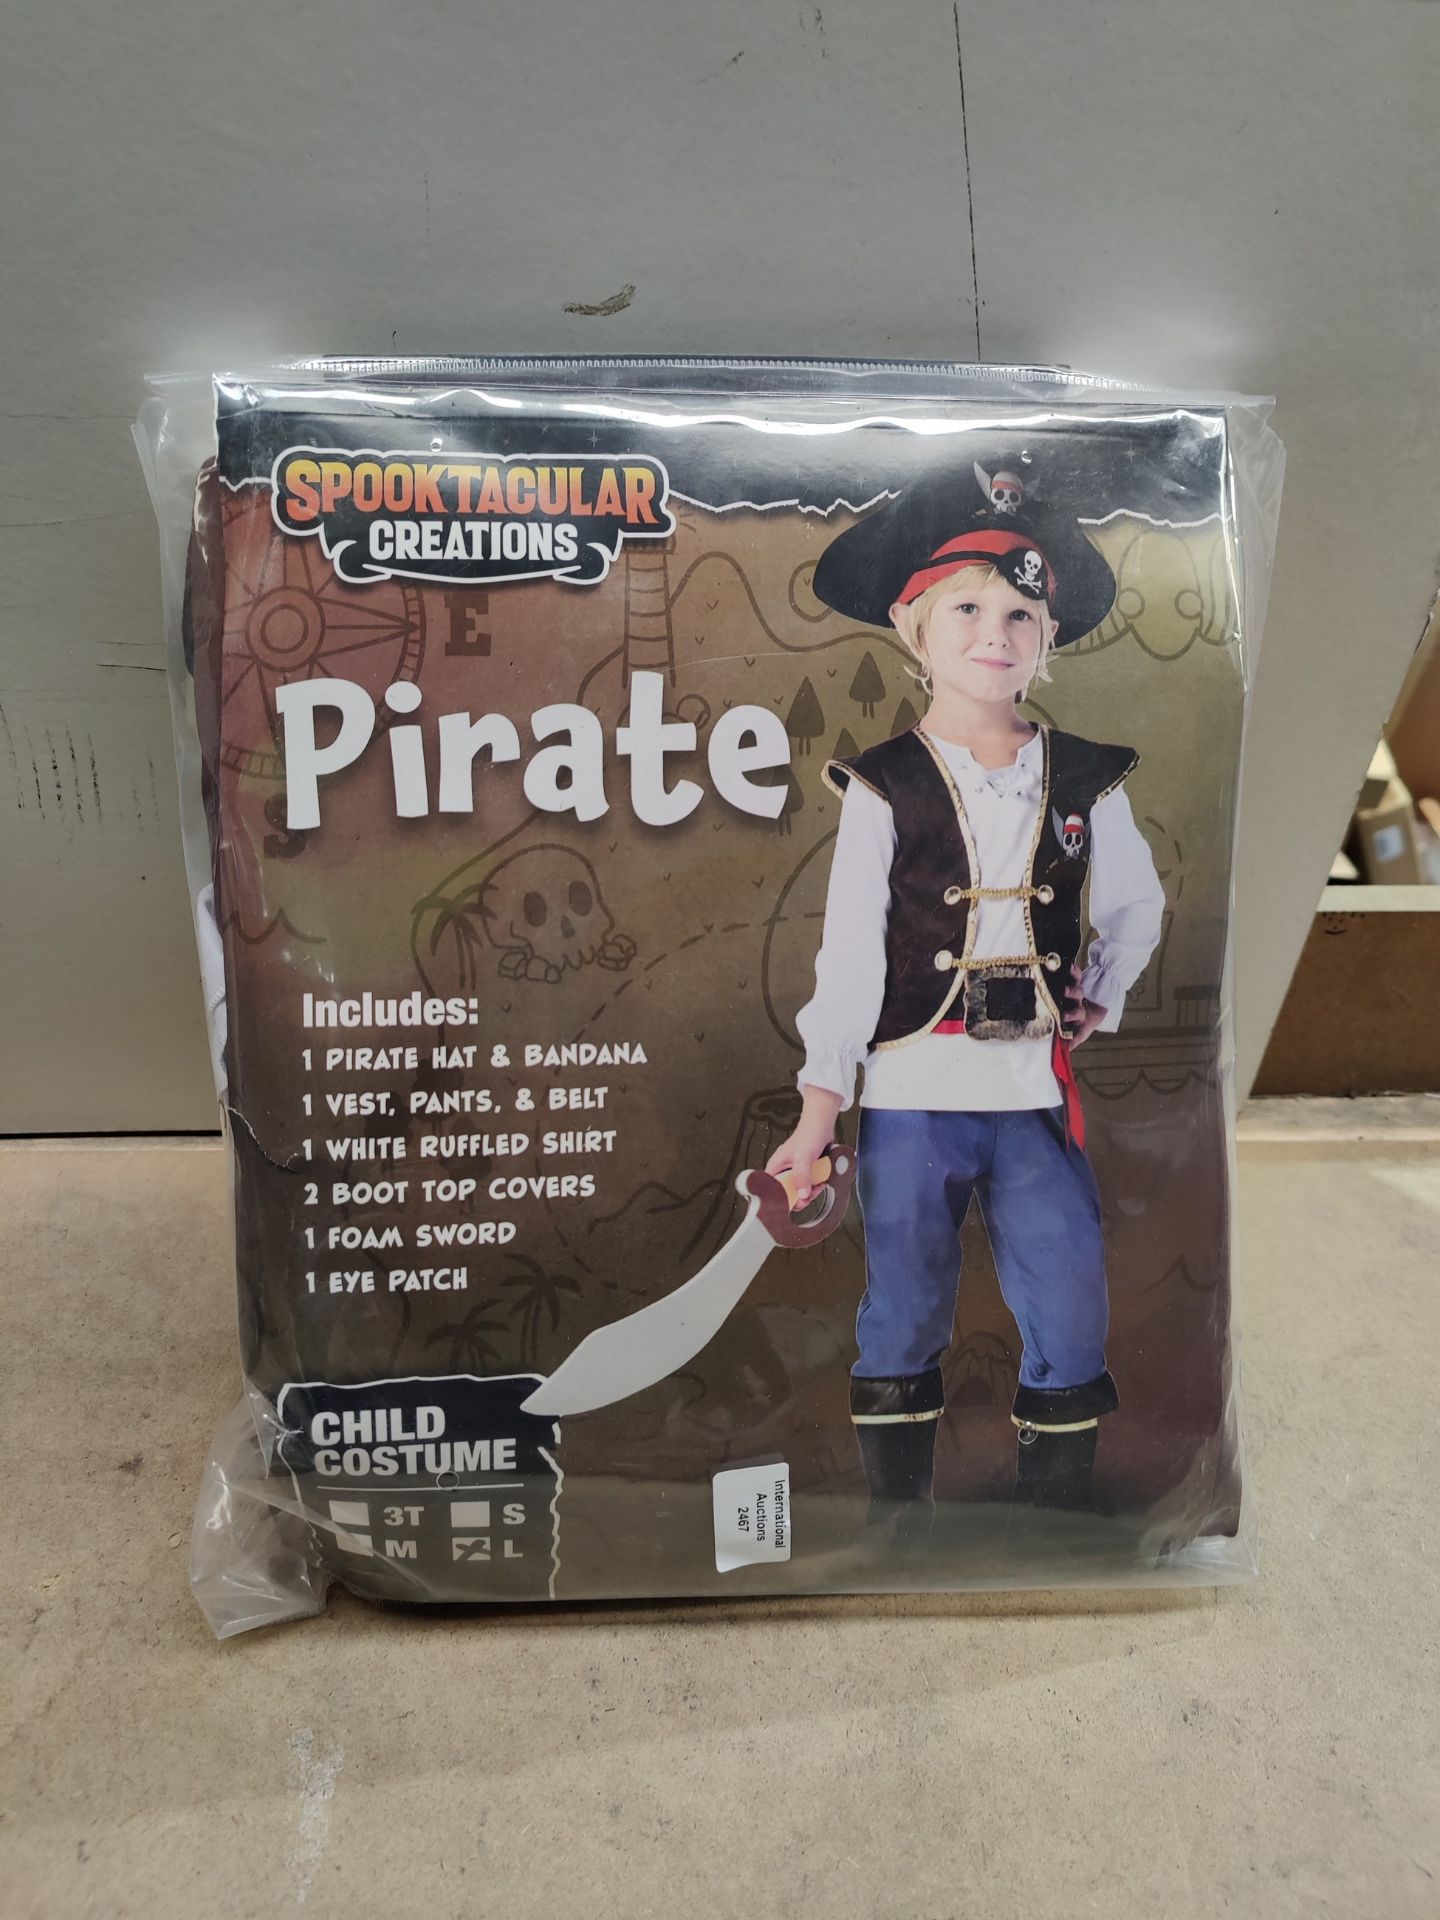 2 Items In This Lot. 2X PIRATE COSTUMES